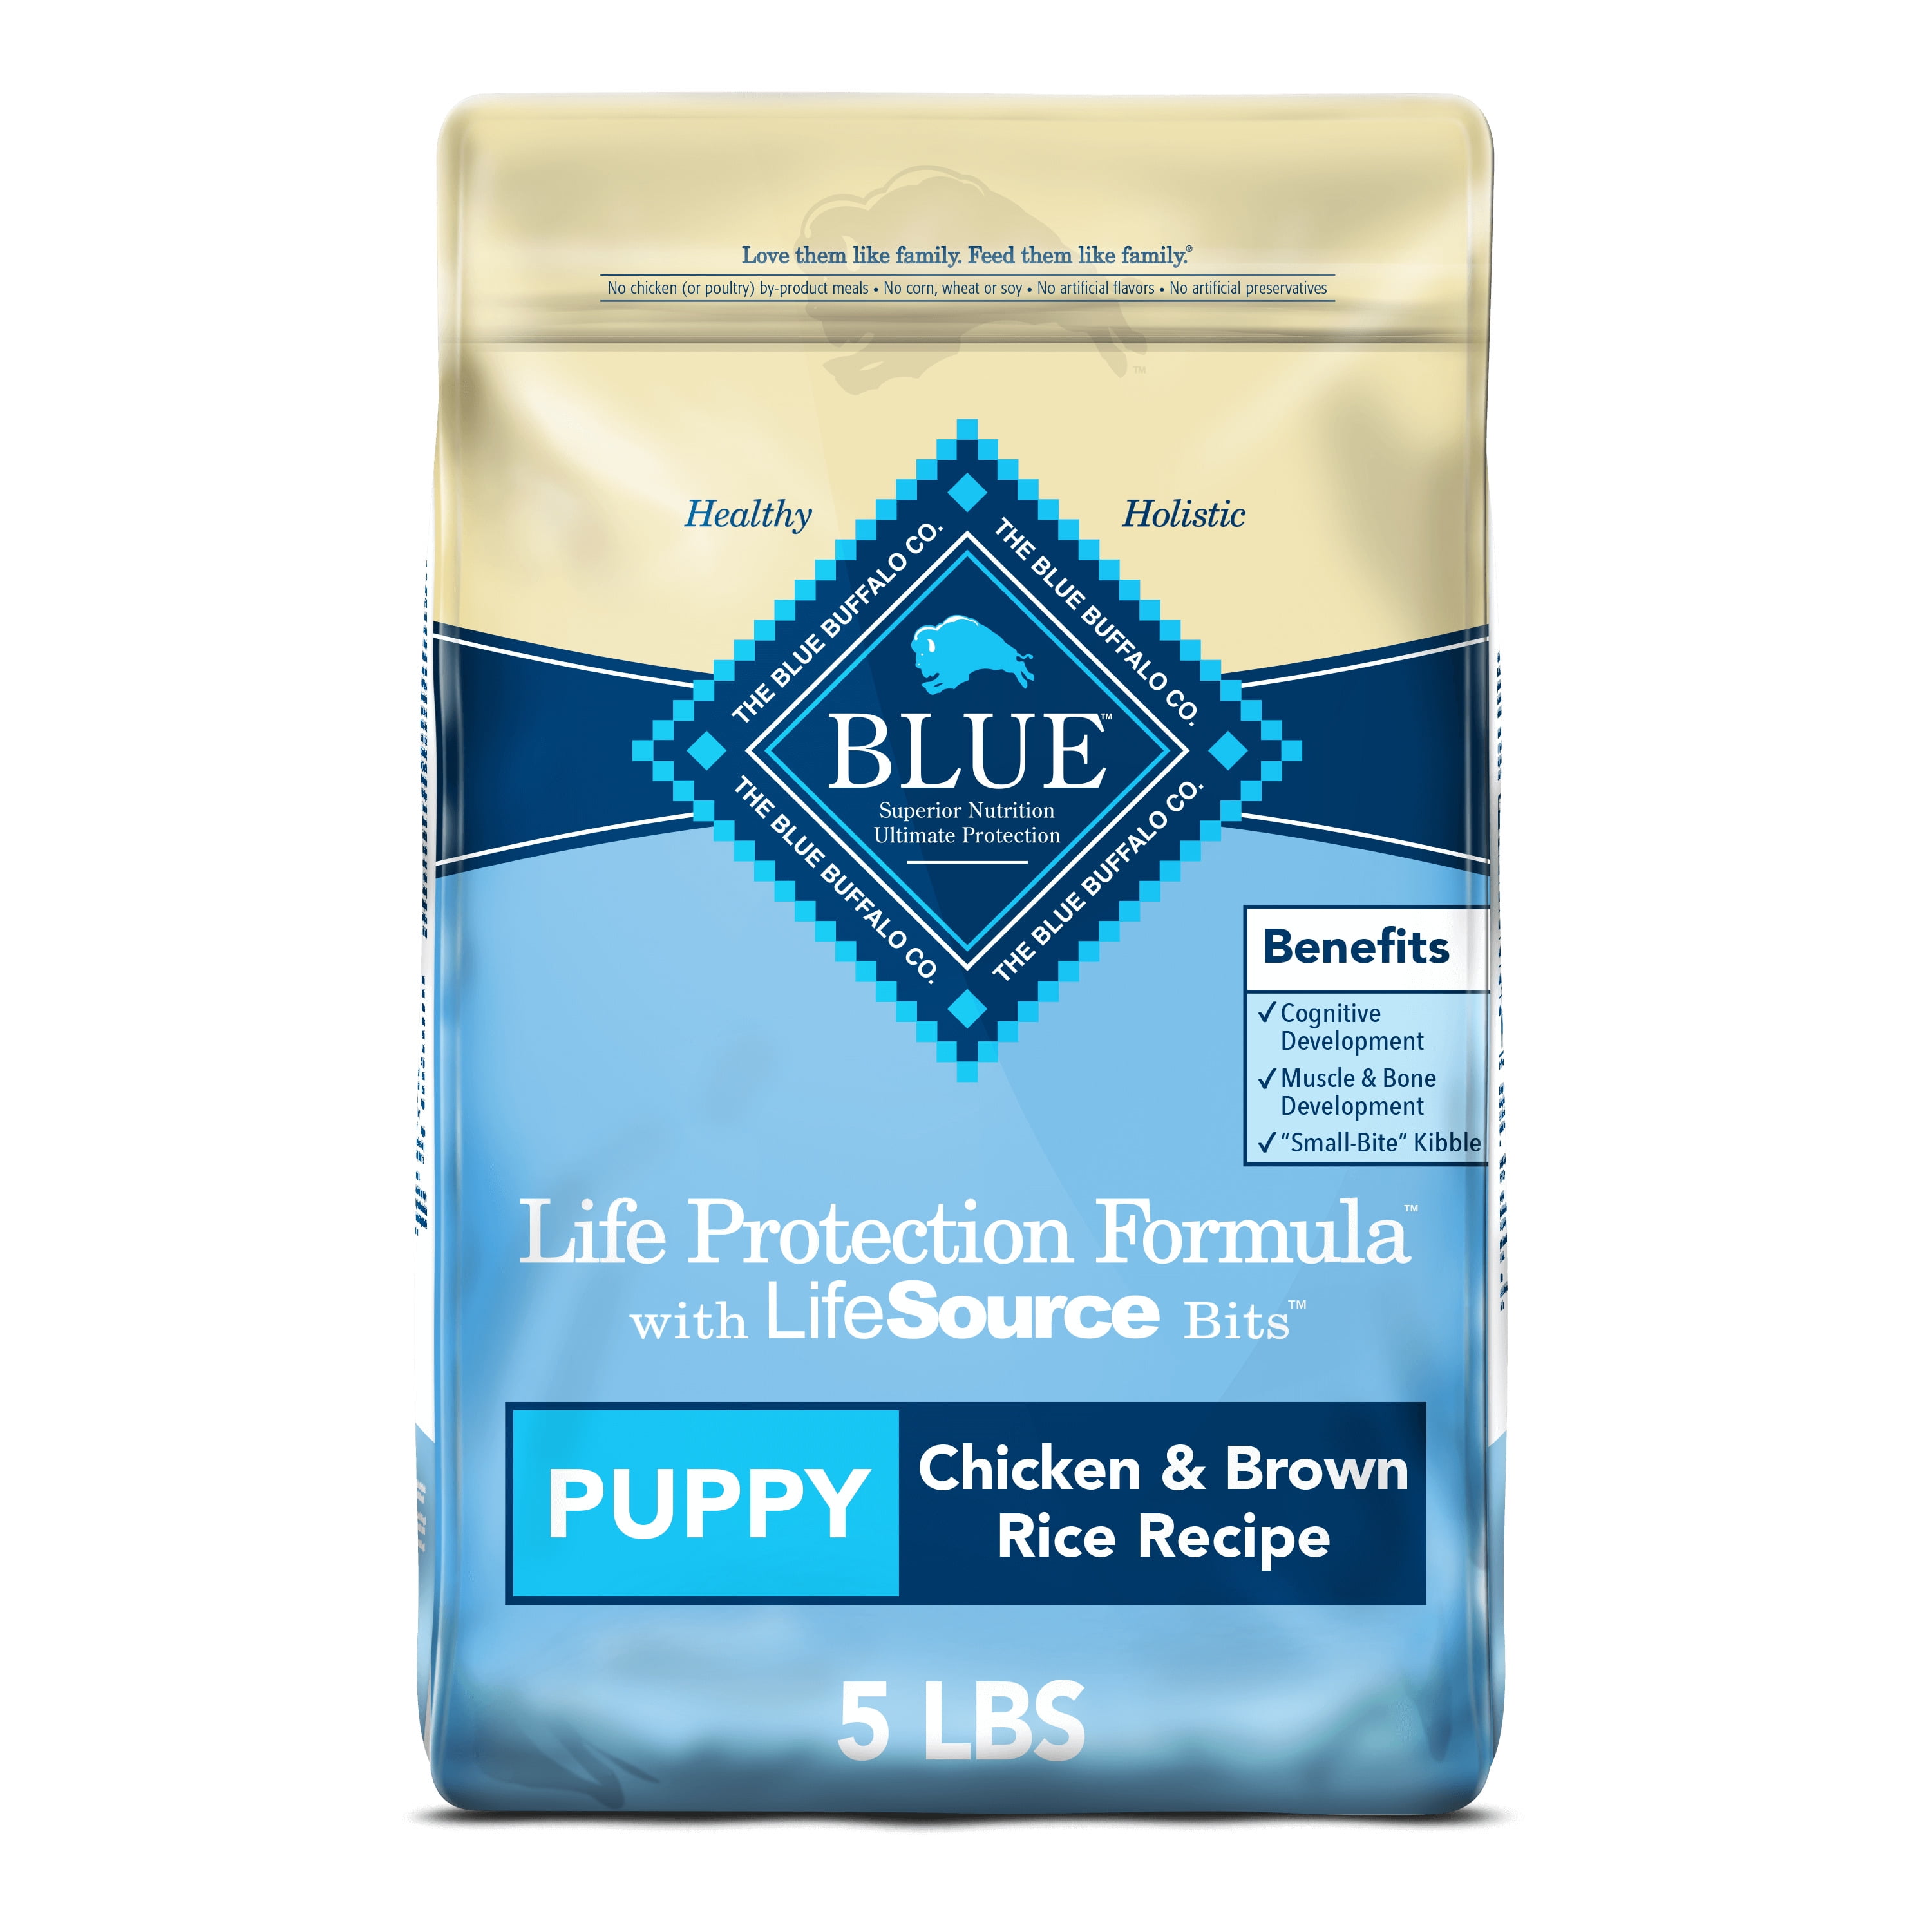 Blue Buffalo Life Protection Formula Chicken and Brown Rice Dry Dog Food for Puppies, Whole Grain, 5 lb. Bag